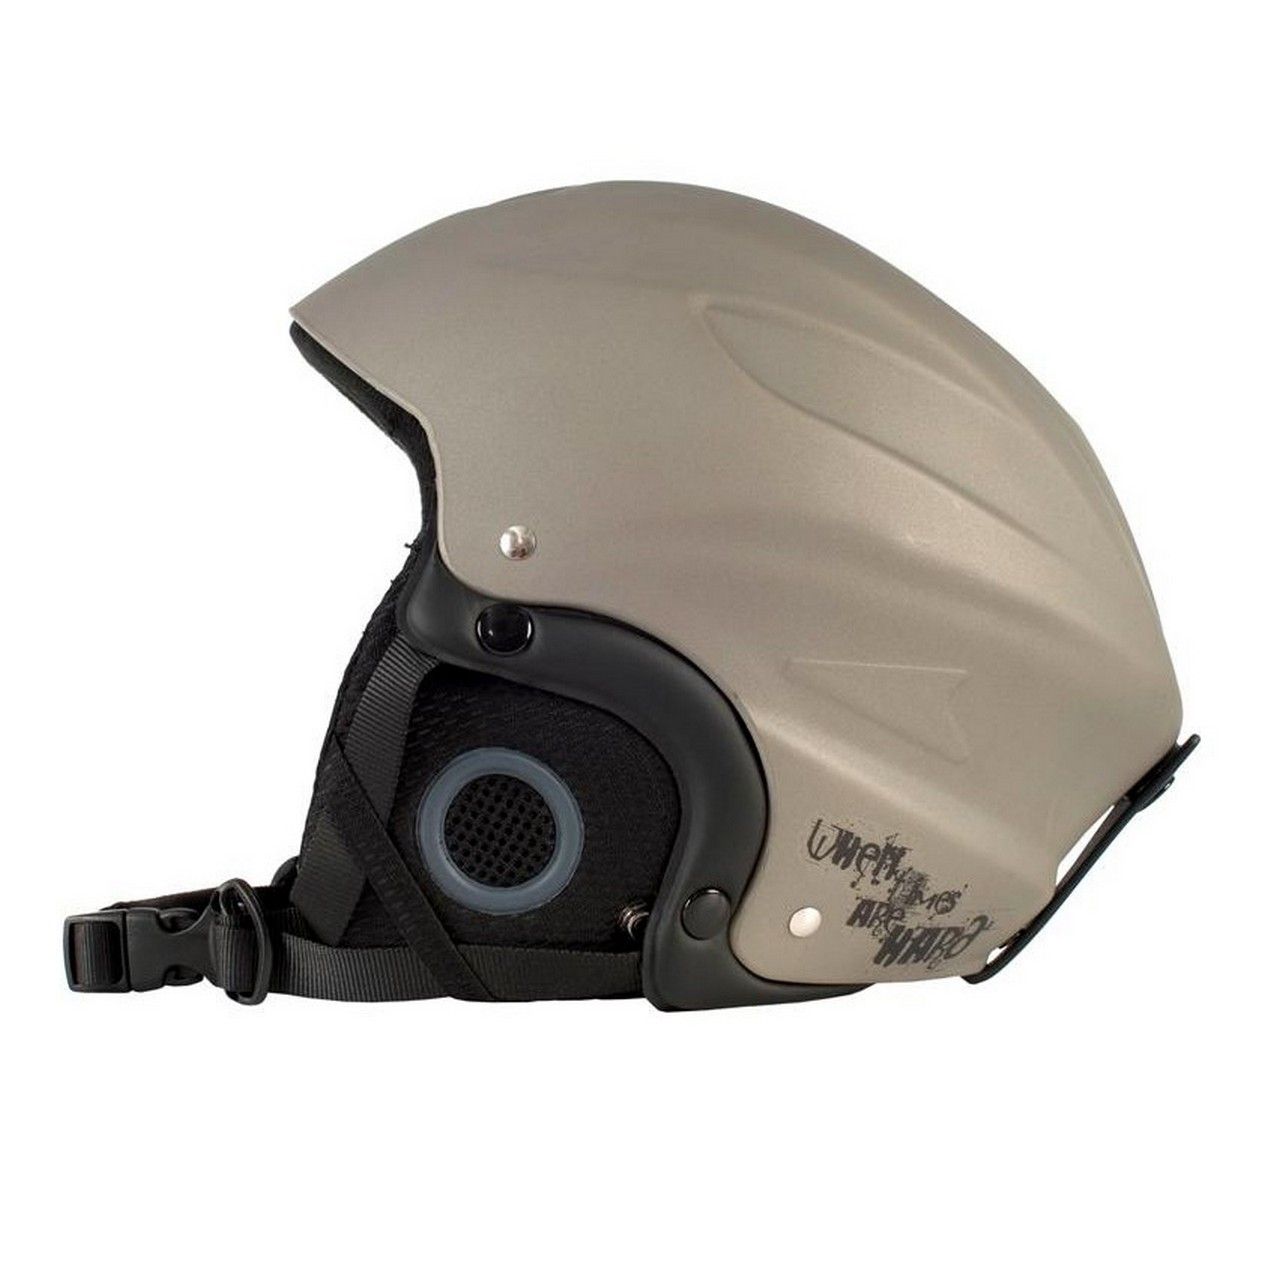 The helmet is tough and durable, as well as being tremendously comfortable and fully ventilated. The free-ride helmet design, quick release buckle, high density ABS lightweight shell, removable foam pad ear protection and EPS core foam all ensure that this Trespass Snow Sport Helmet provides magnificent comfort and protection. Conforms to CE EN 1077. Precision adjustable fit. Goggle retainer. Sizes - Large: 58-62cm, Medium: 54-58cm.